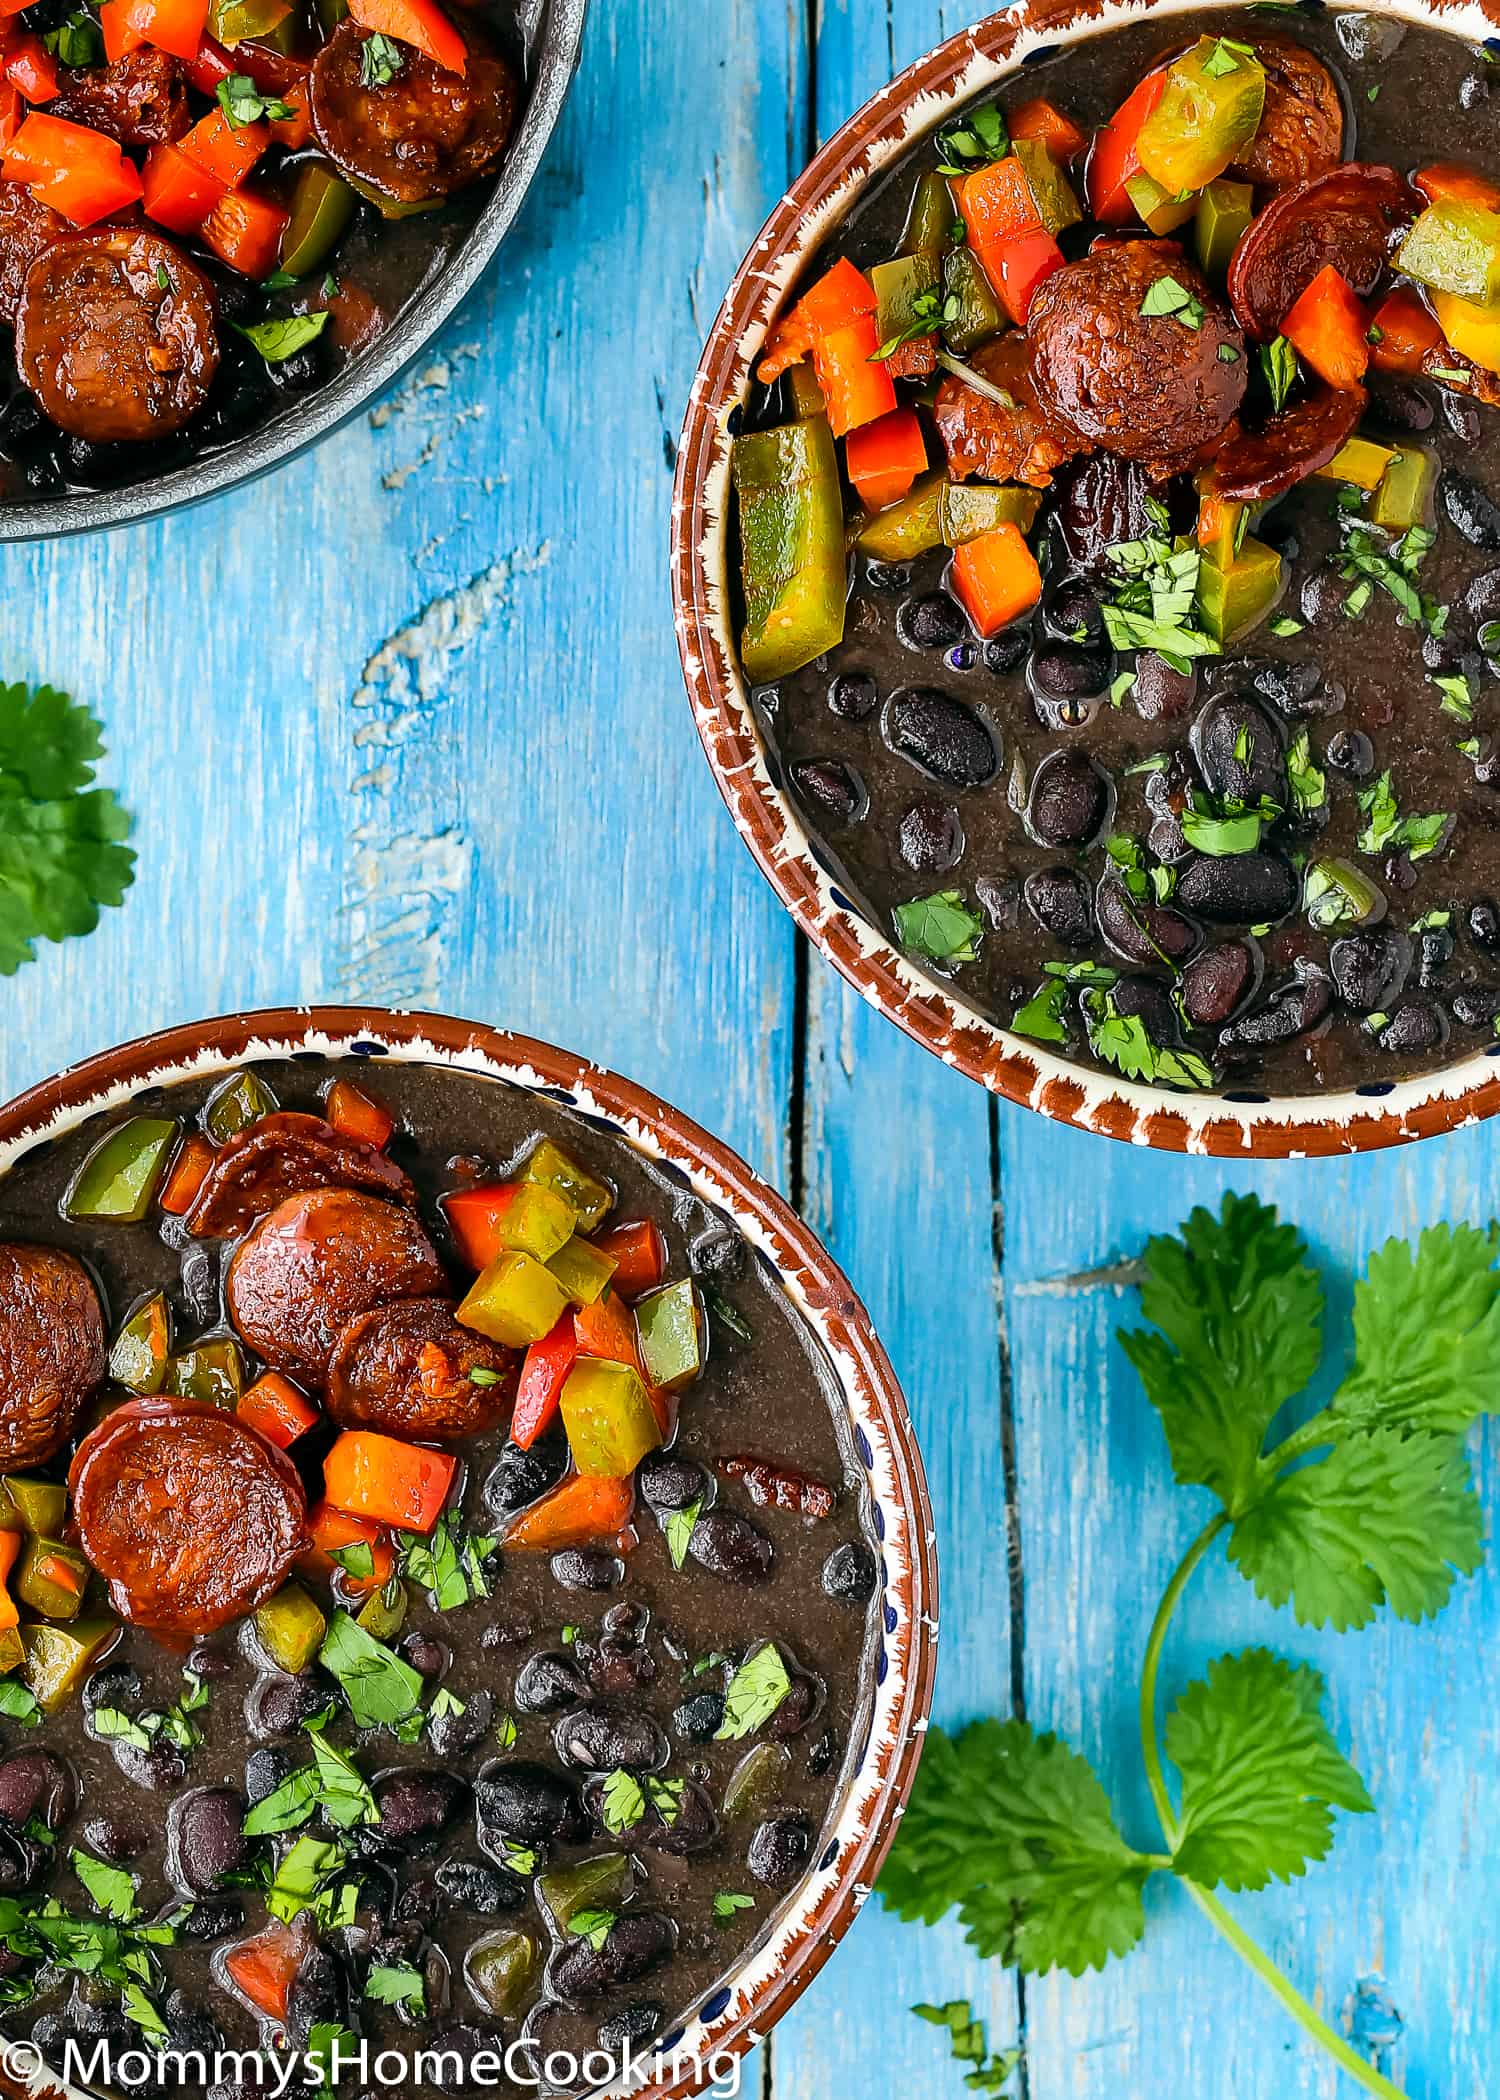 These Instant Pot Black Beans with Chorizo are hearty, satisfying and incredibly flavorful! They're quick and easy to make and perfect for feeding a crowd. Serve them on their own, or as a side dish to complete any meal. https://mommyshomecooking.com